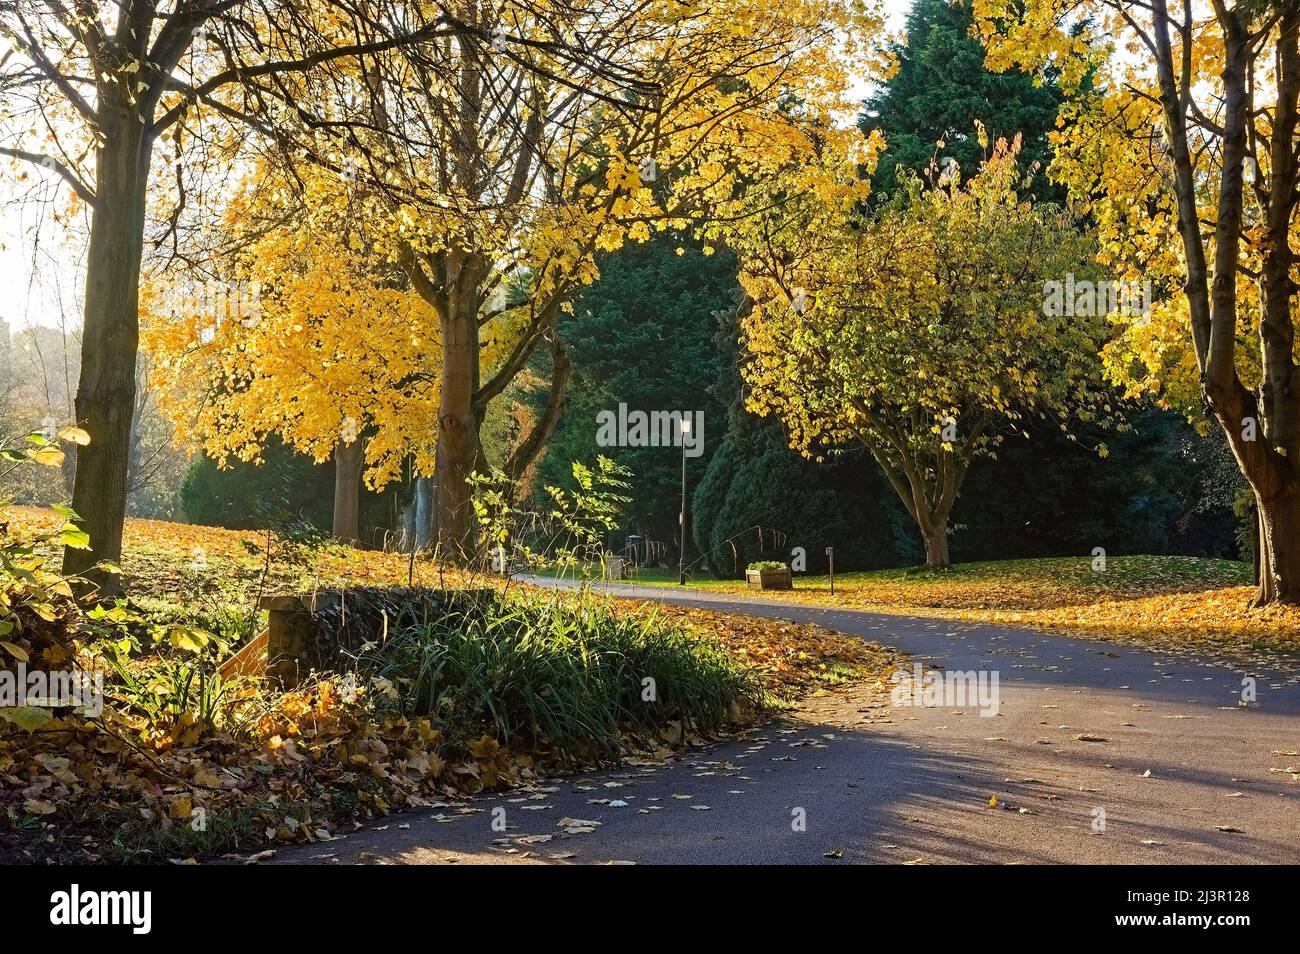 a narrow road winding through a wooded park or cemetery during autumn Stock Photo